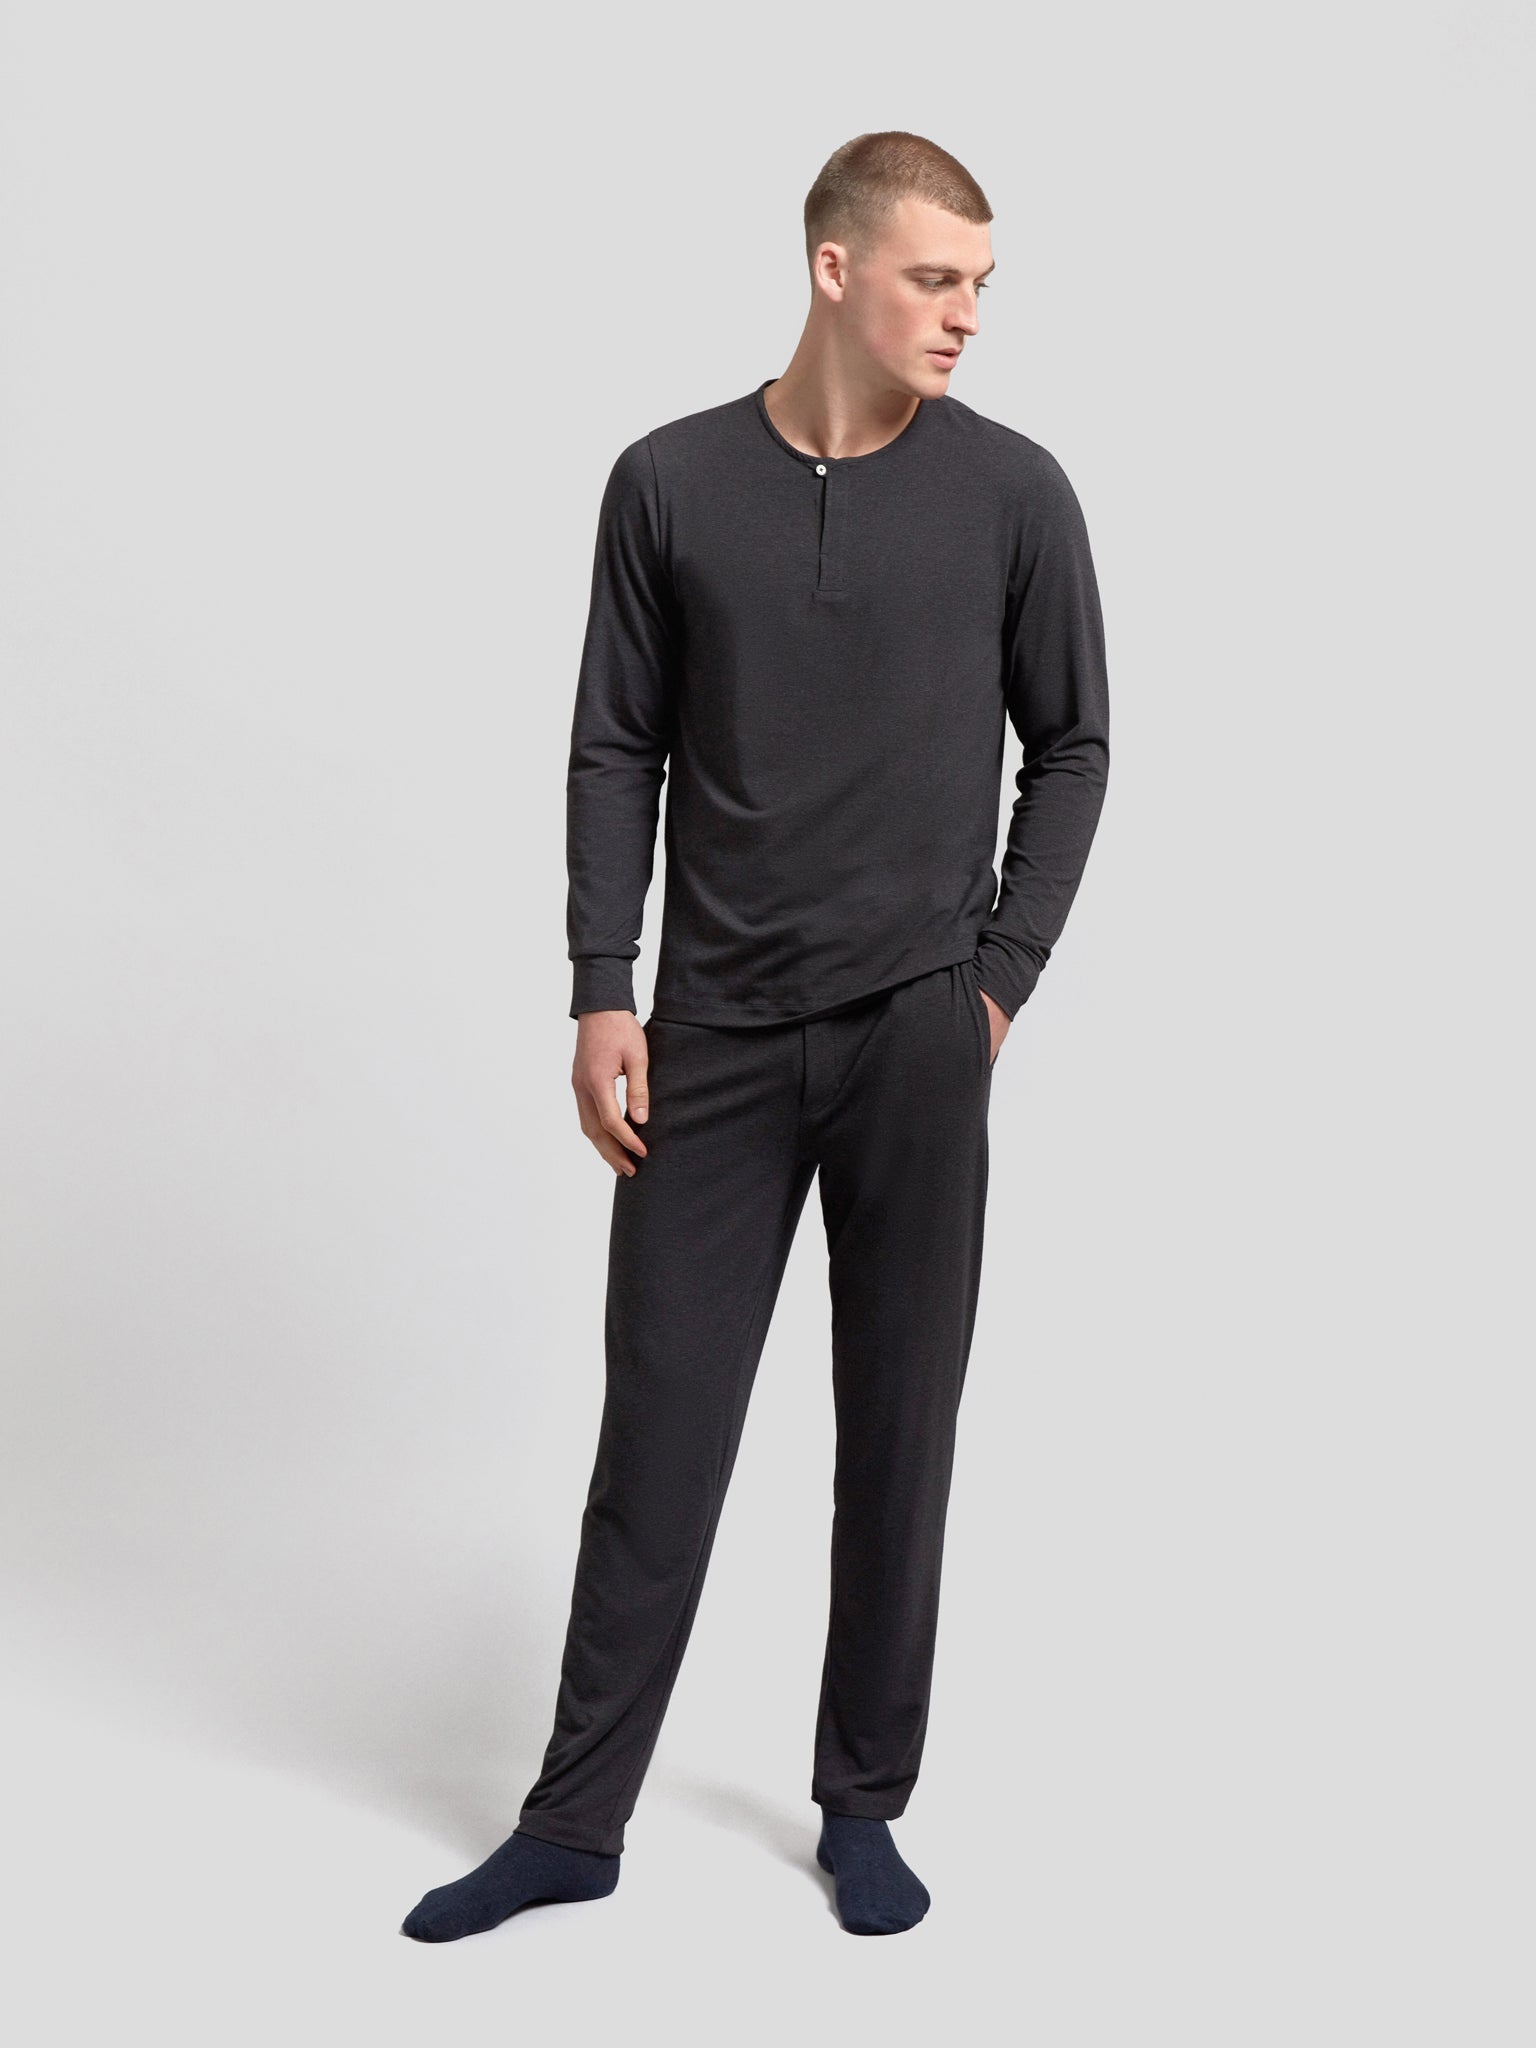 Lounge Trousers - Charcoal Lyocell Cotton